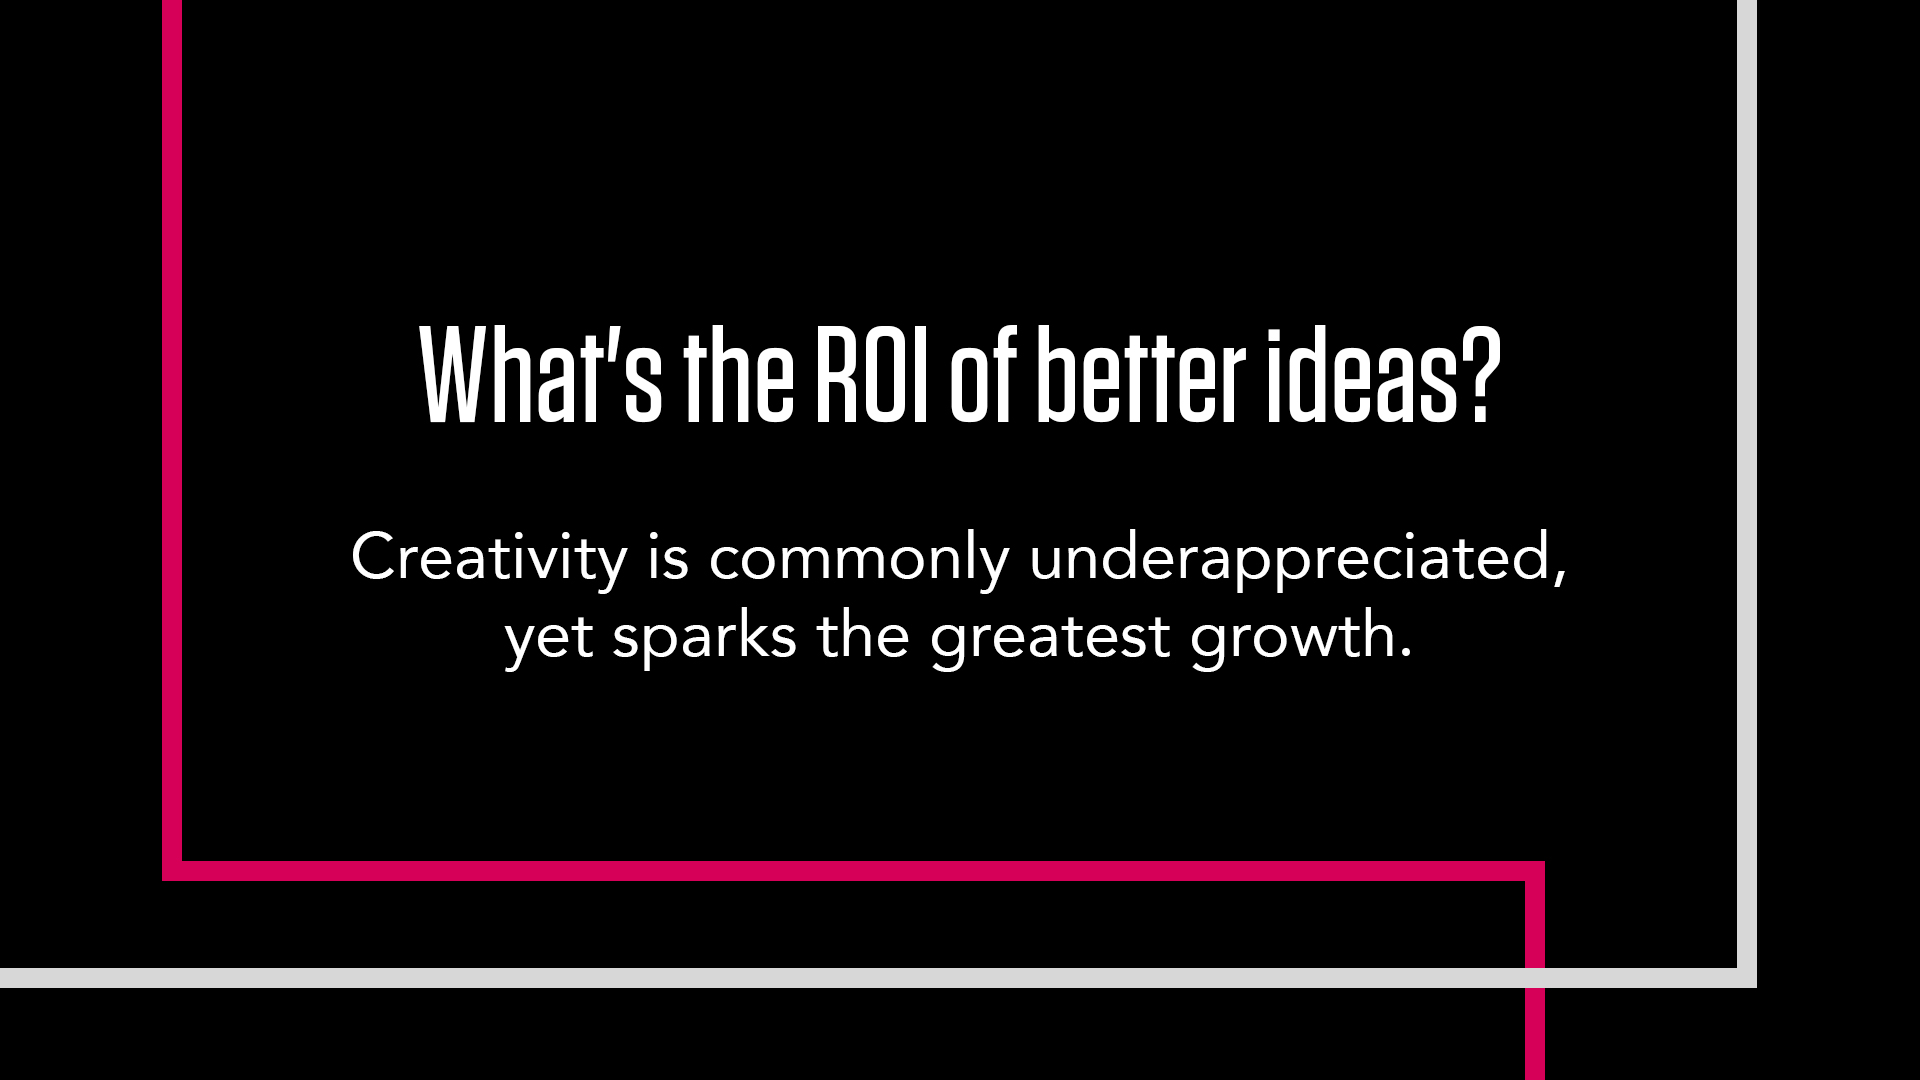 What's the ROI of better ideas?